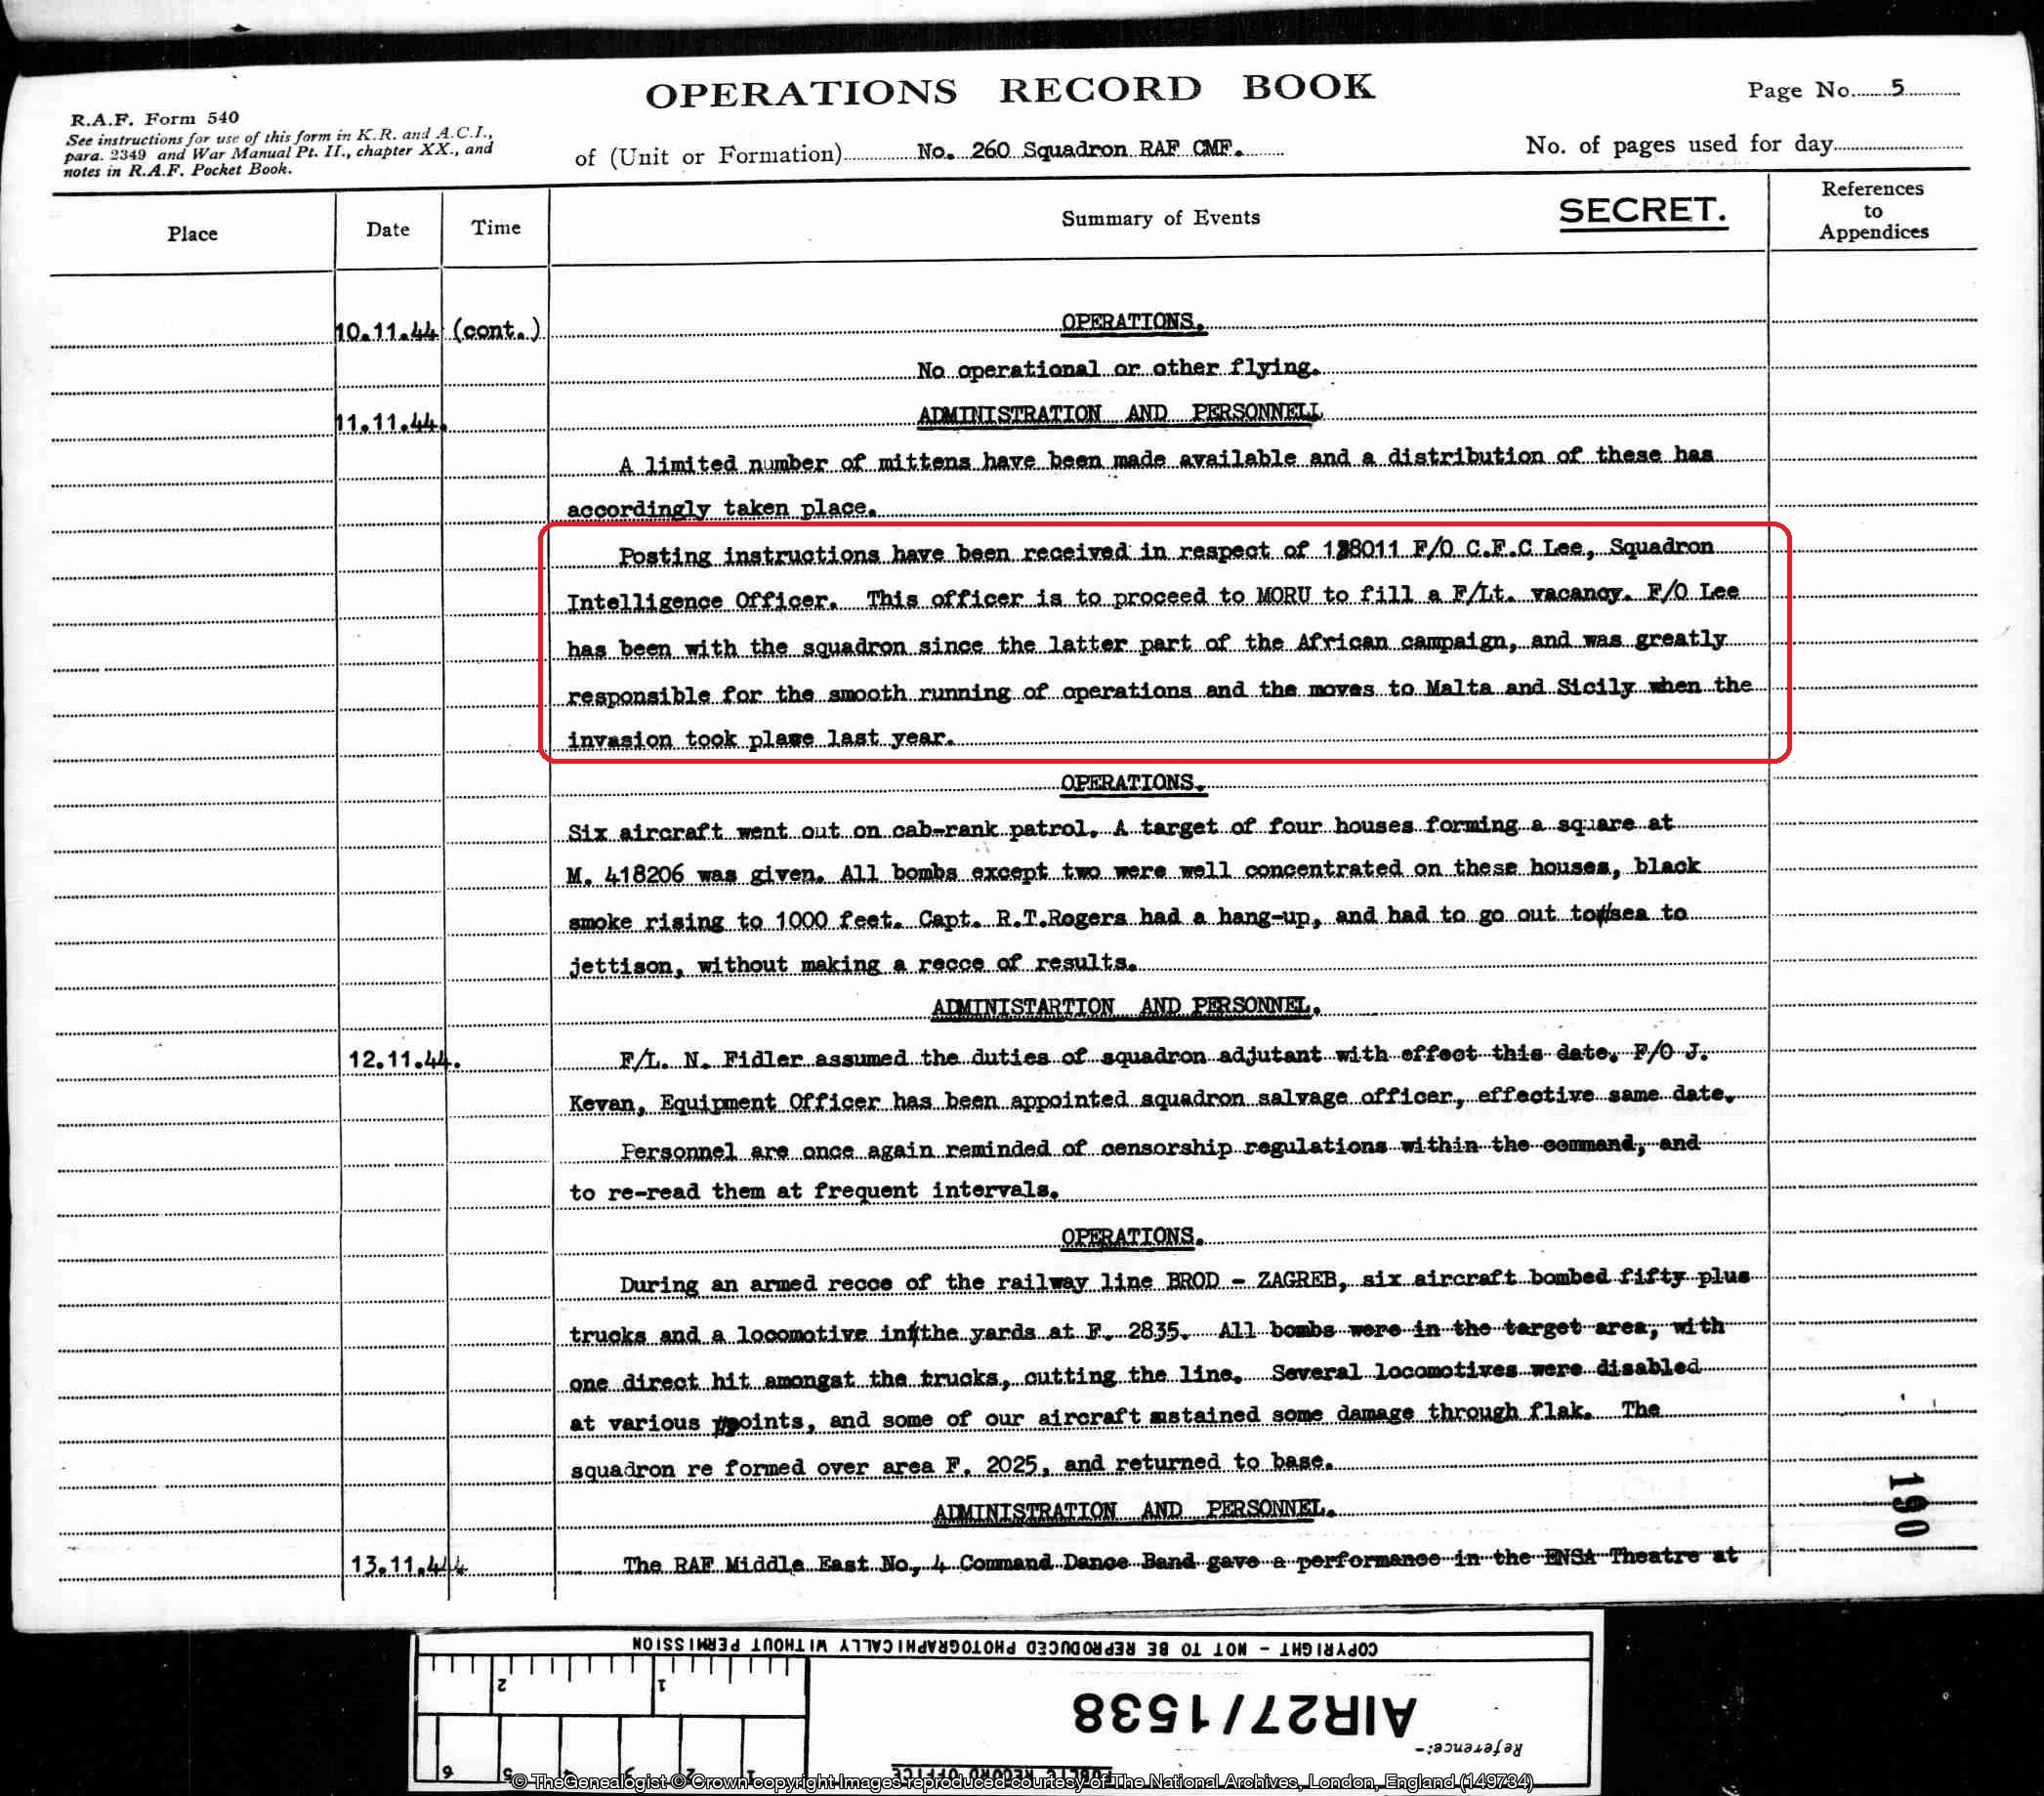 11th November 1944 ORB in which Christopher Lee is posted to MORU to fill a F/Lt vacancy